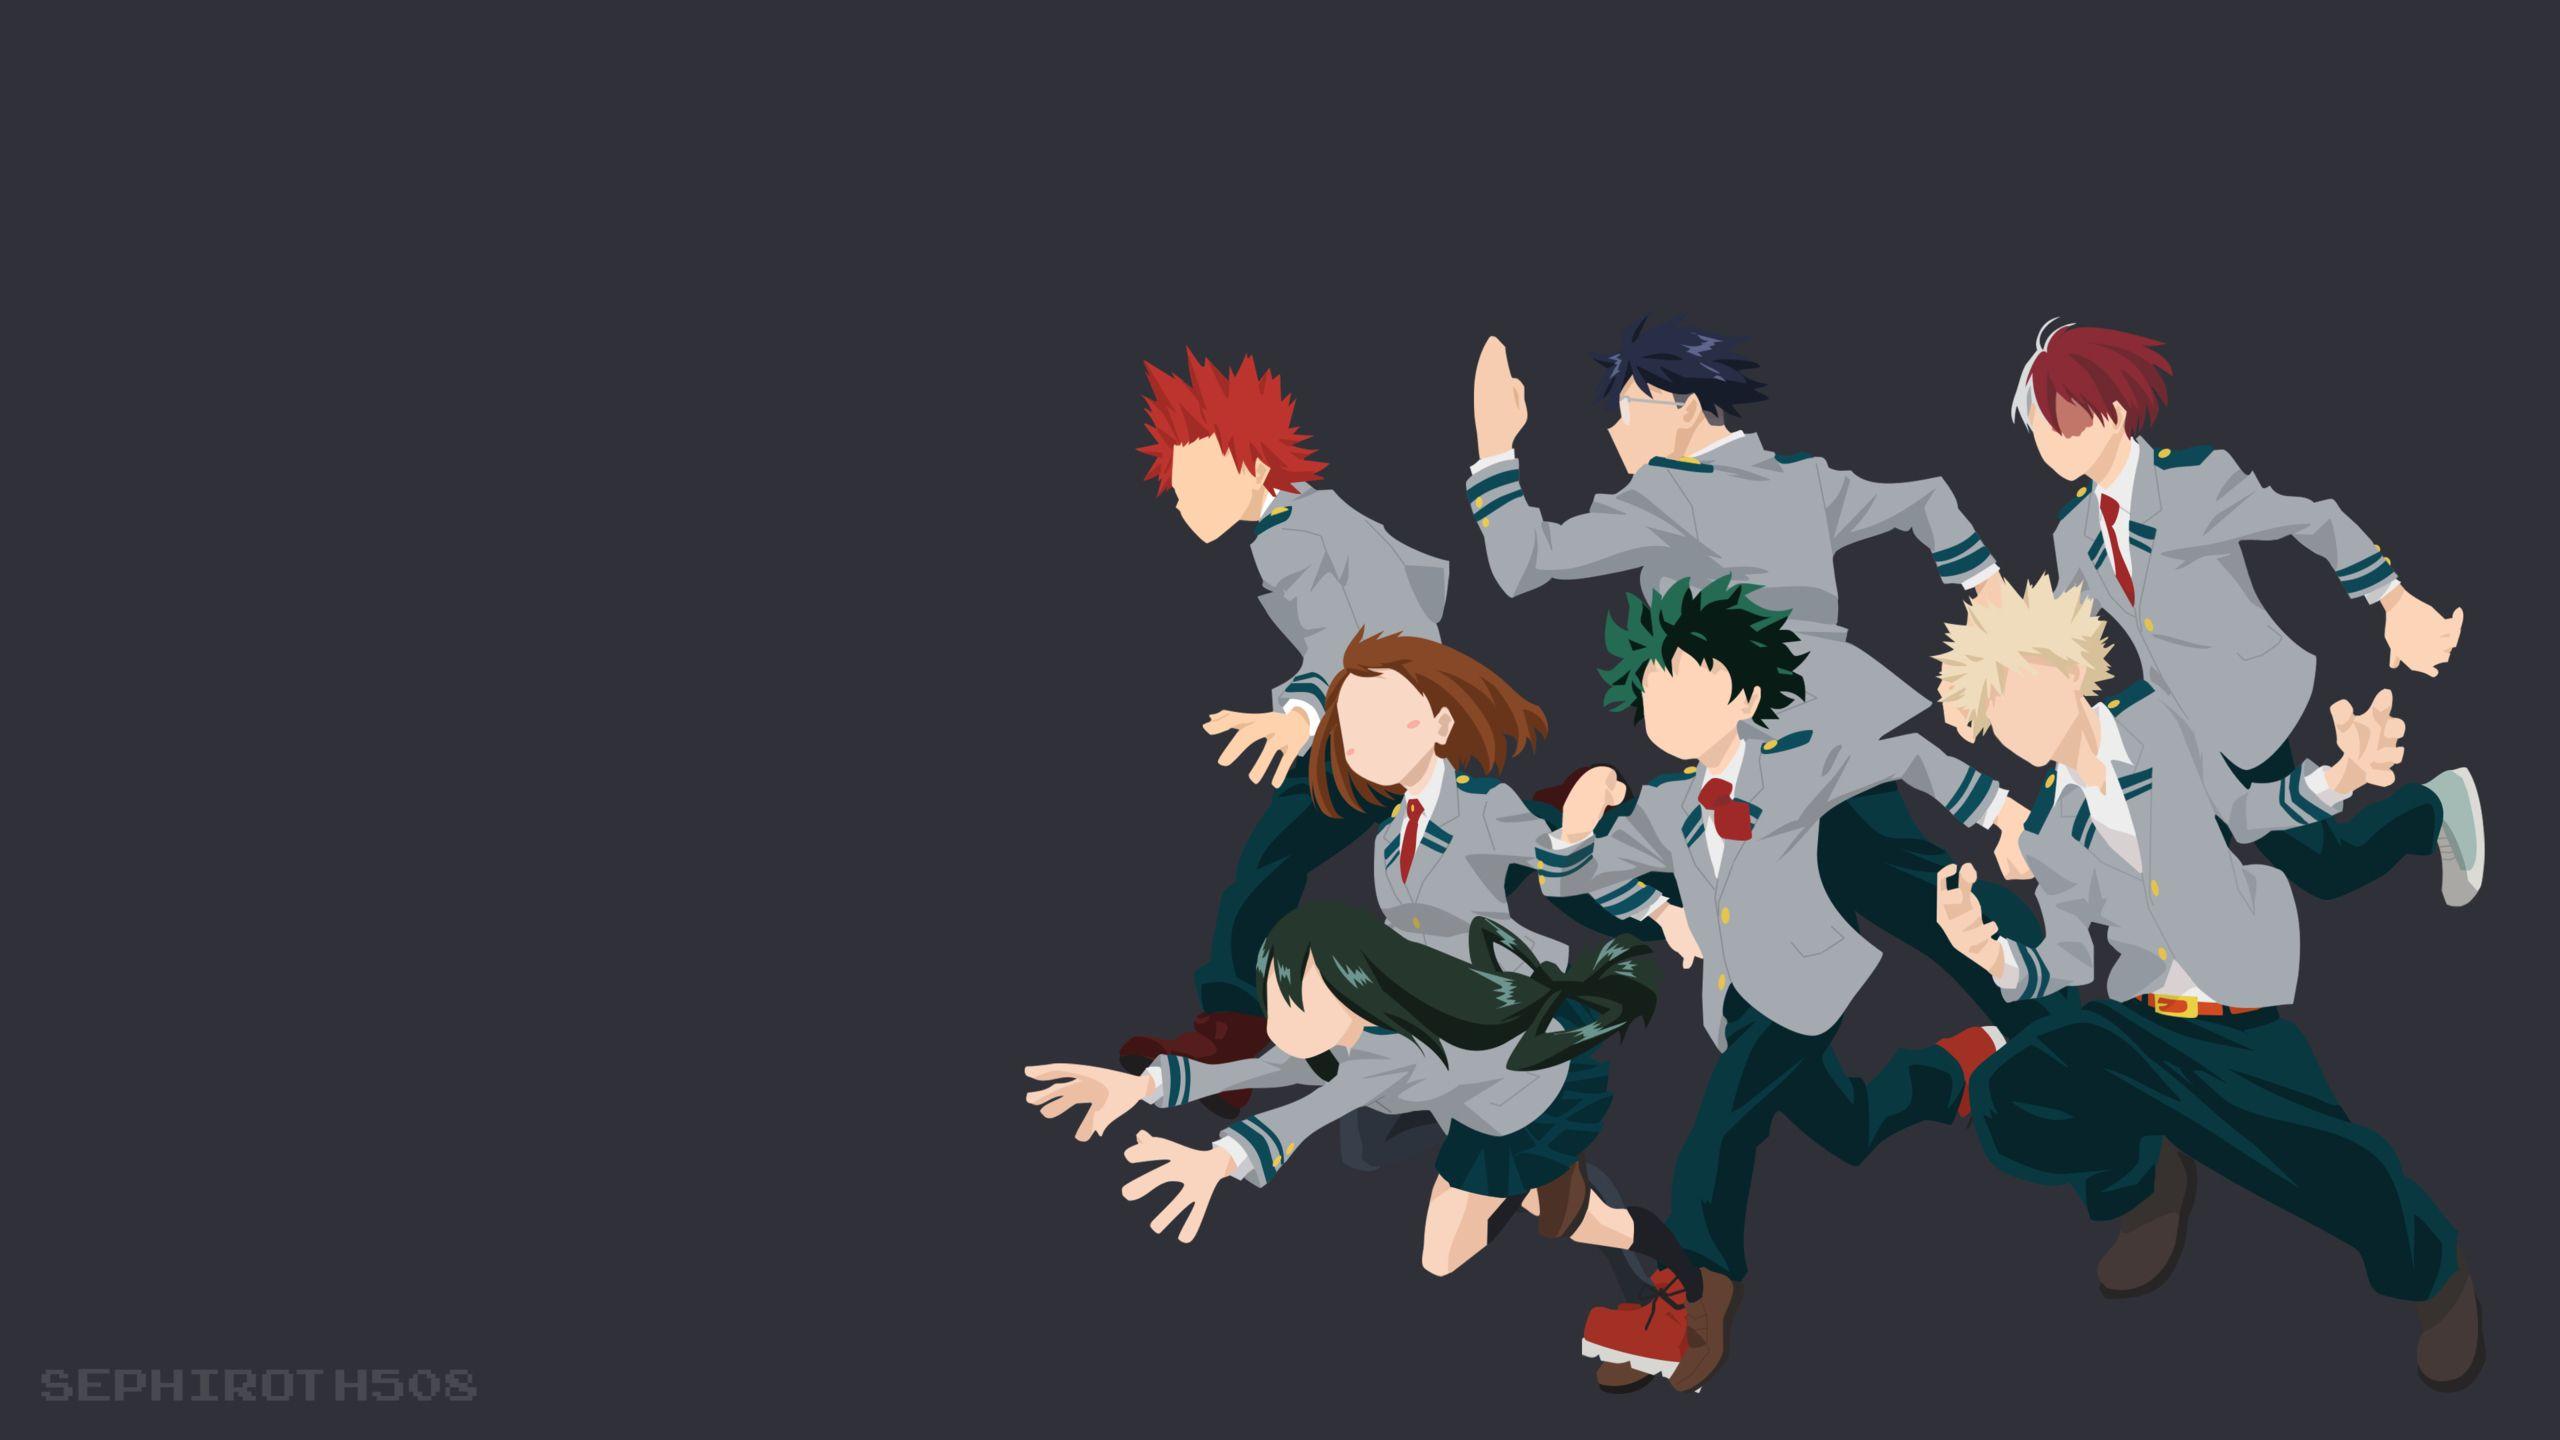 BNHA Computer Aesthetic Wallpapers - Wallpaper Cave